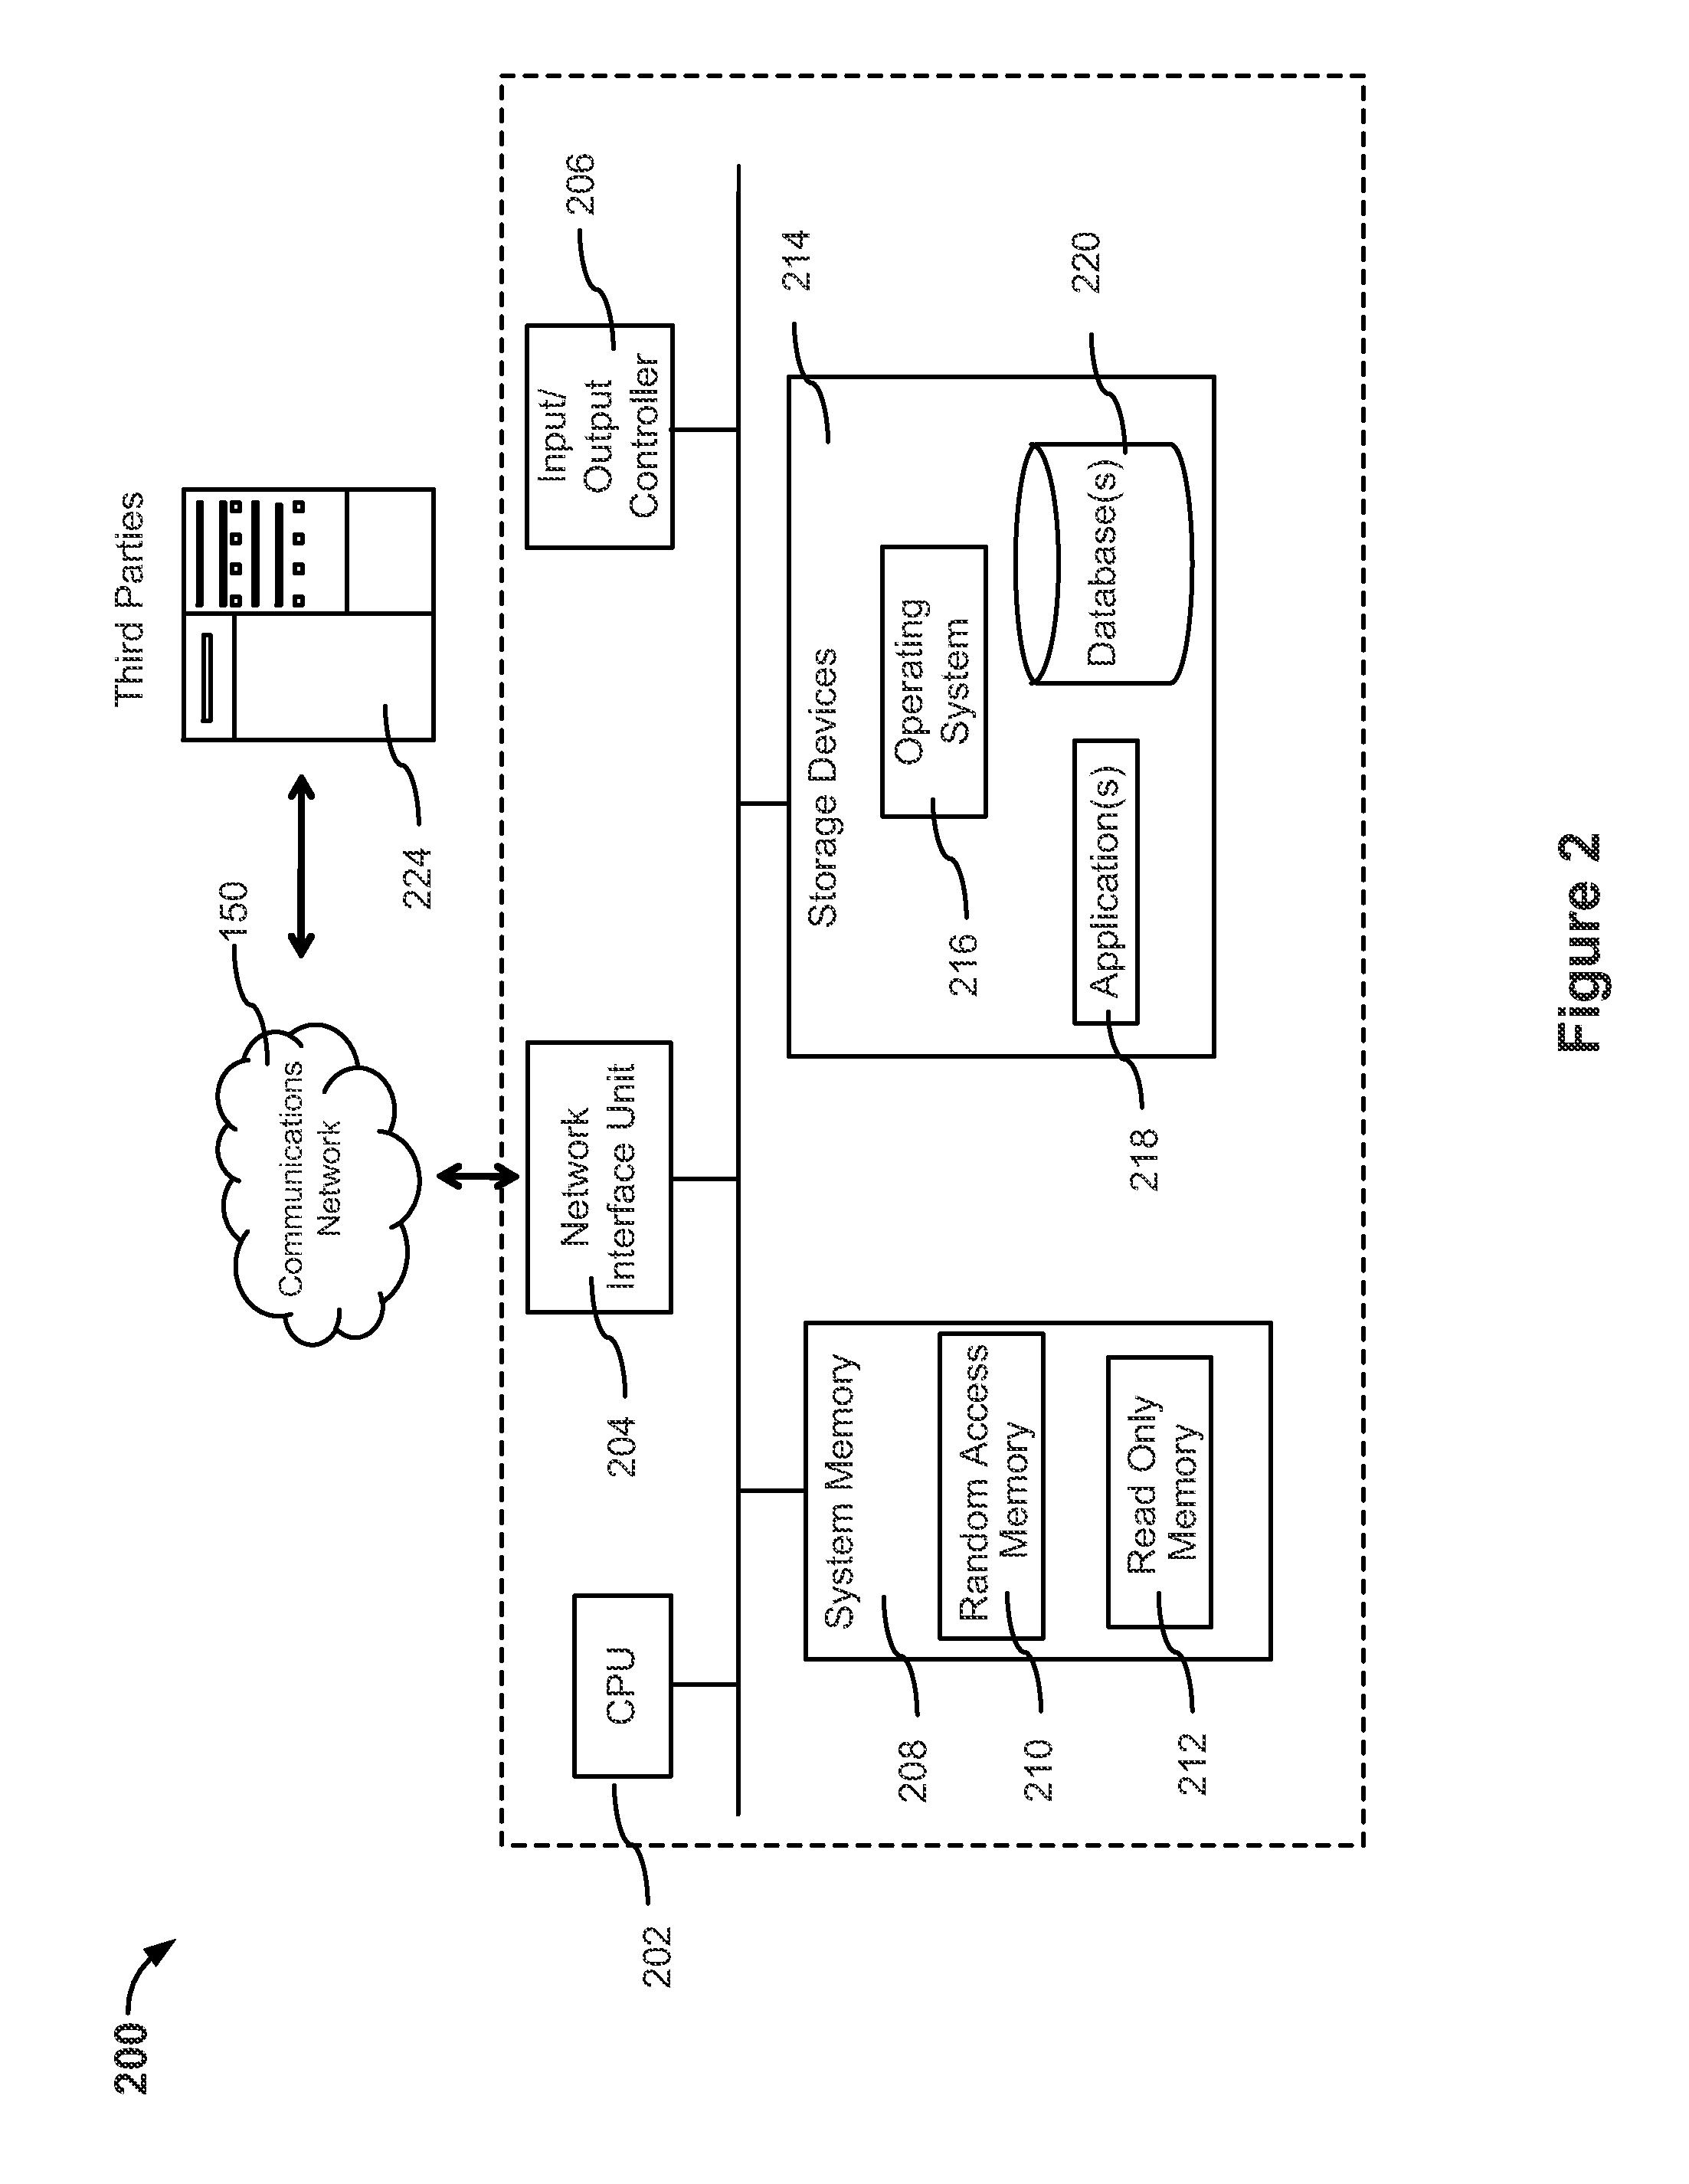 System and method for providing dynamic insurance portal transaction authentication and authorization